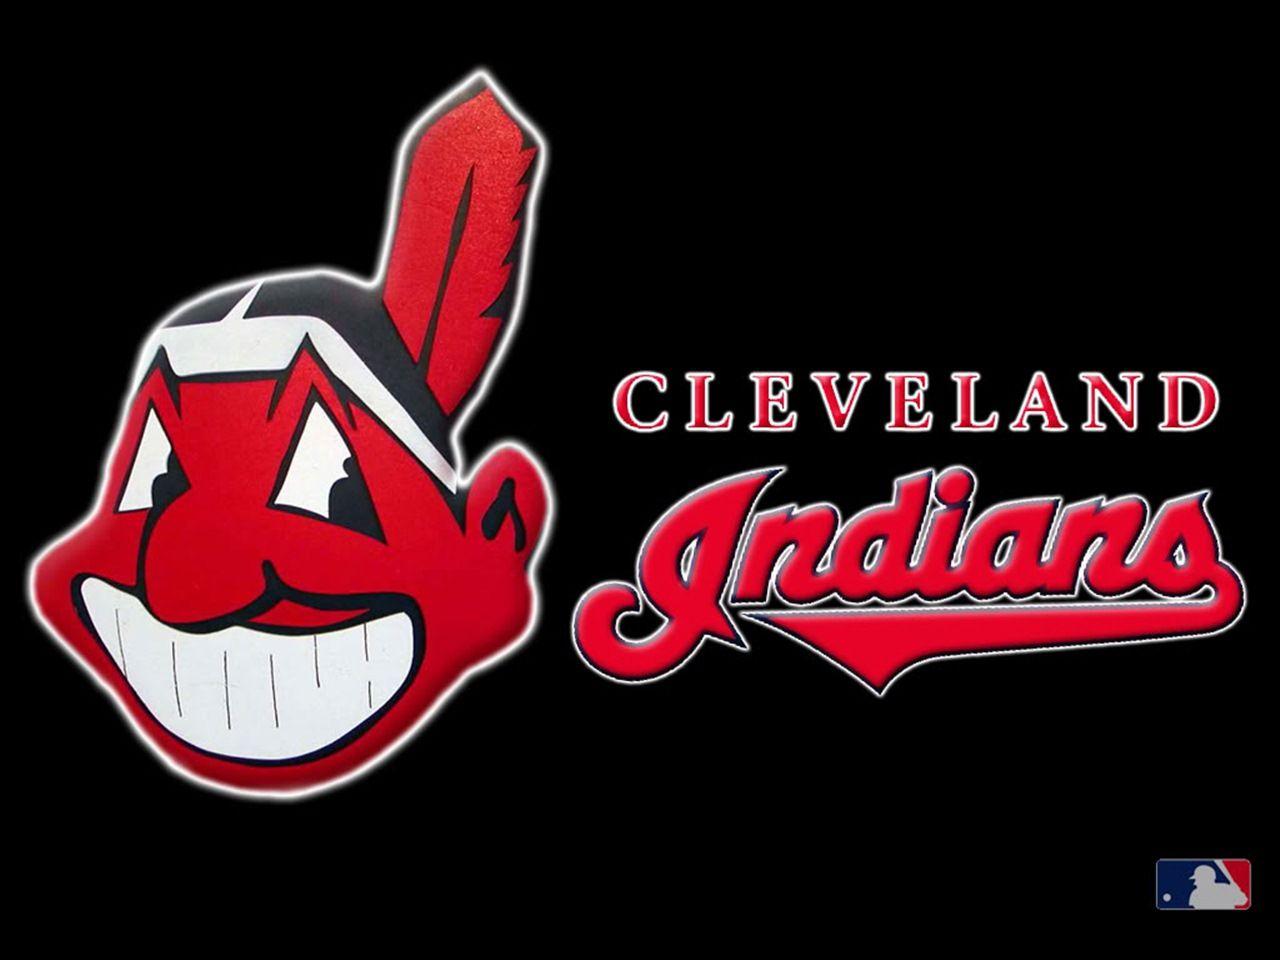 Cleveland Indians Logo - How about those Cleveland Indians?